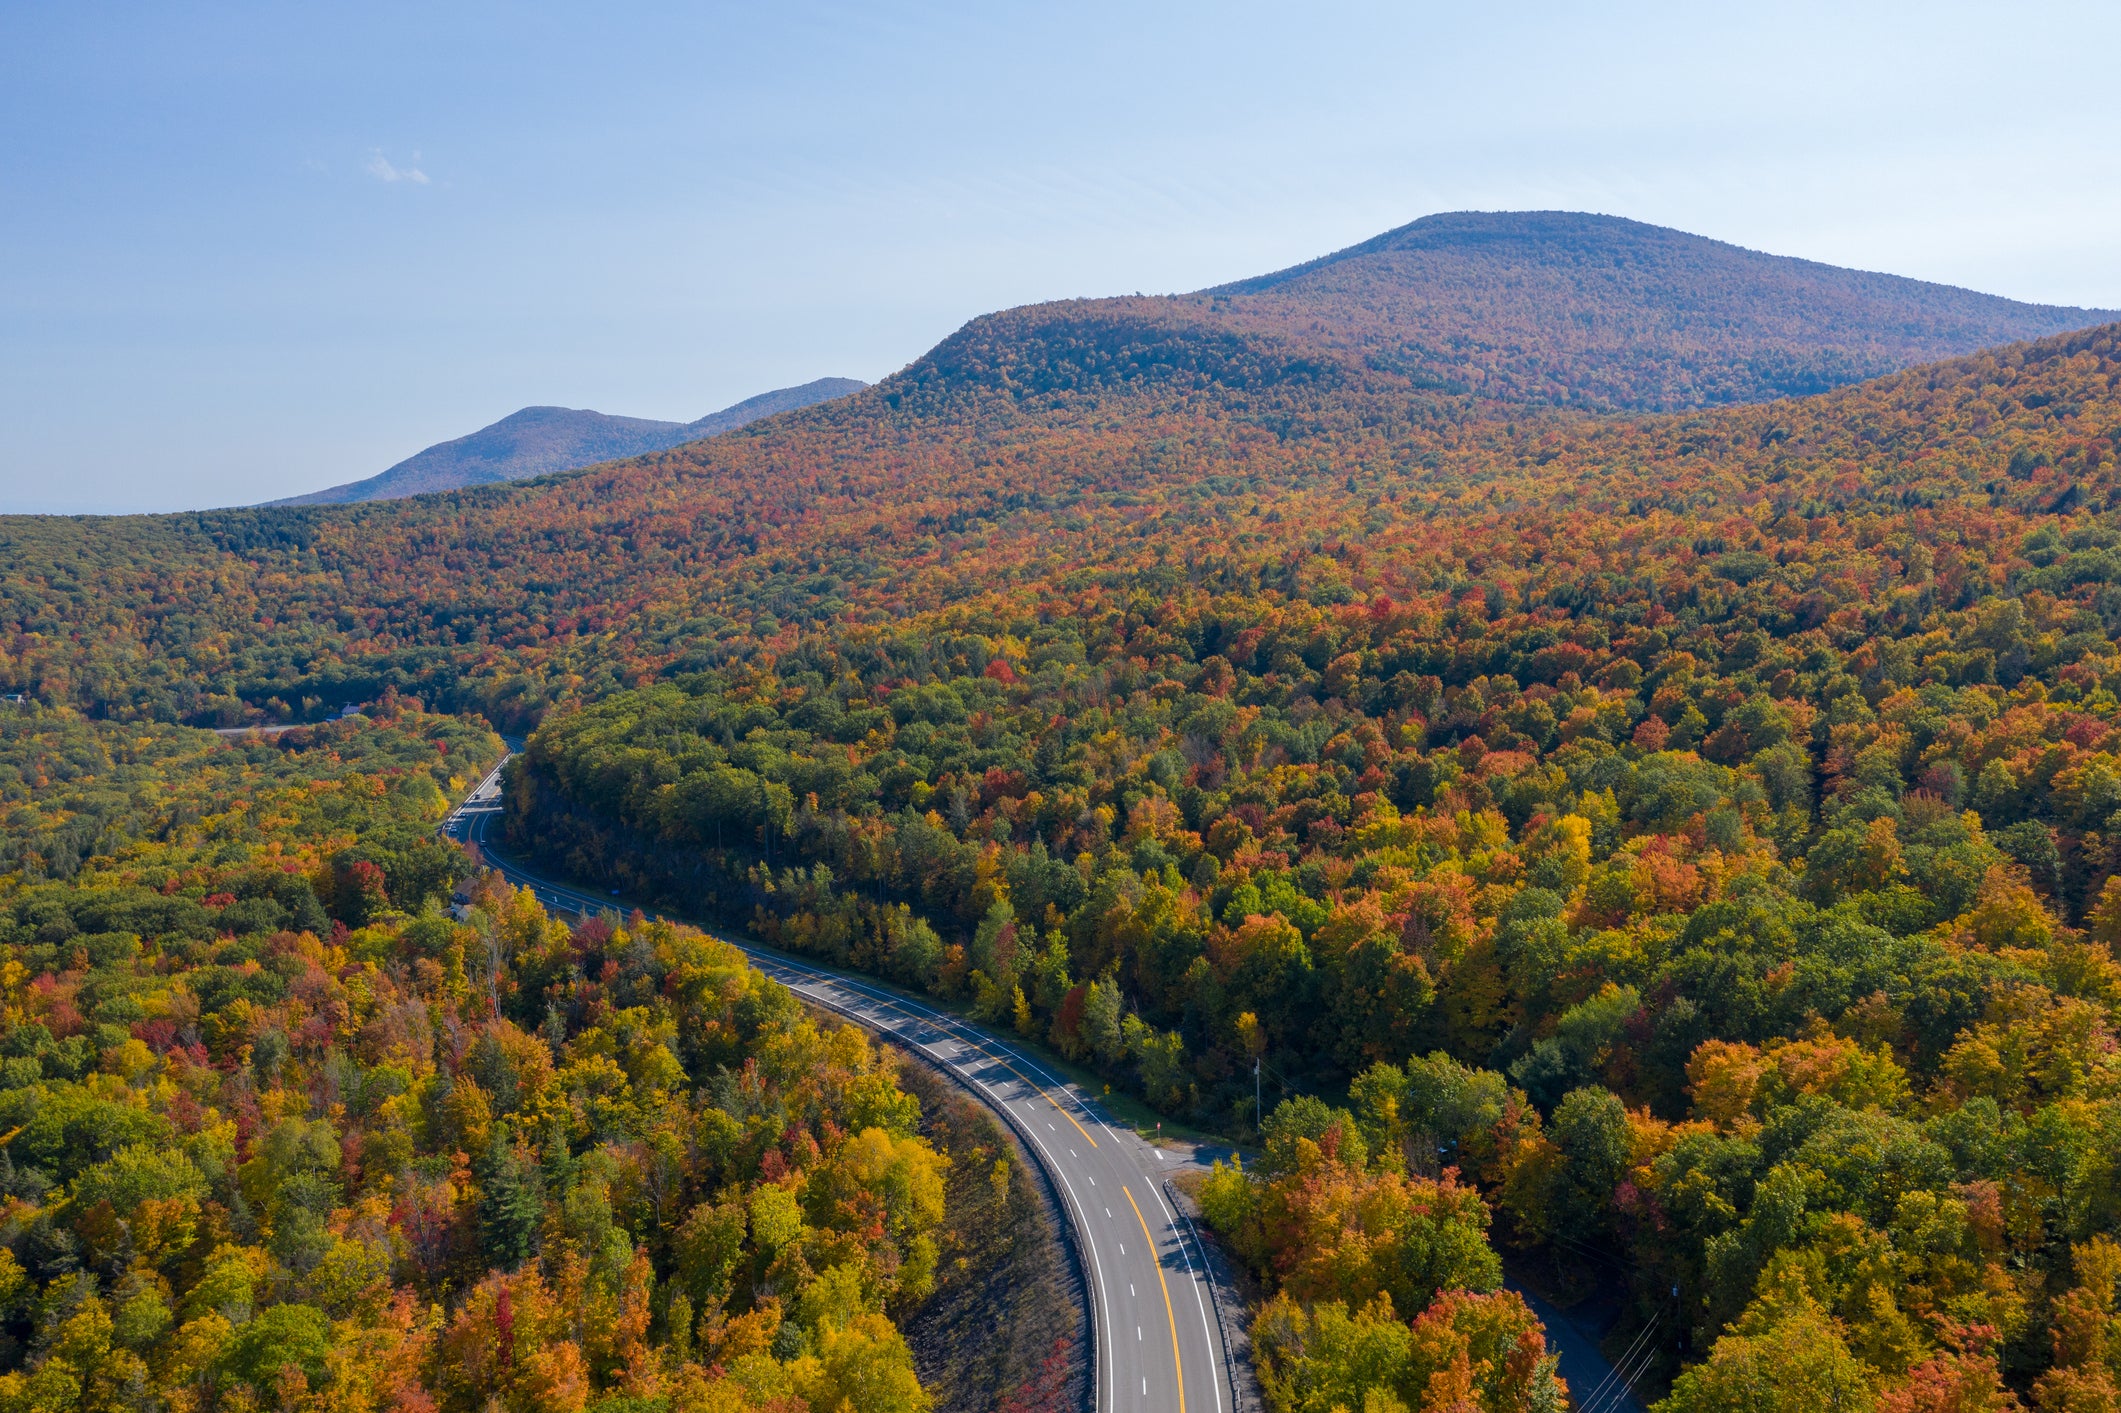 In the Catskills, about 100 miles north of Manhattan, there are 98 peaks over 3,000ft